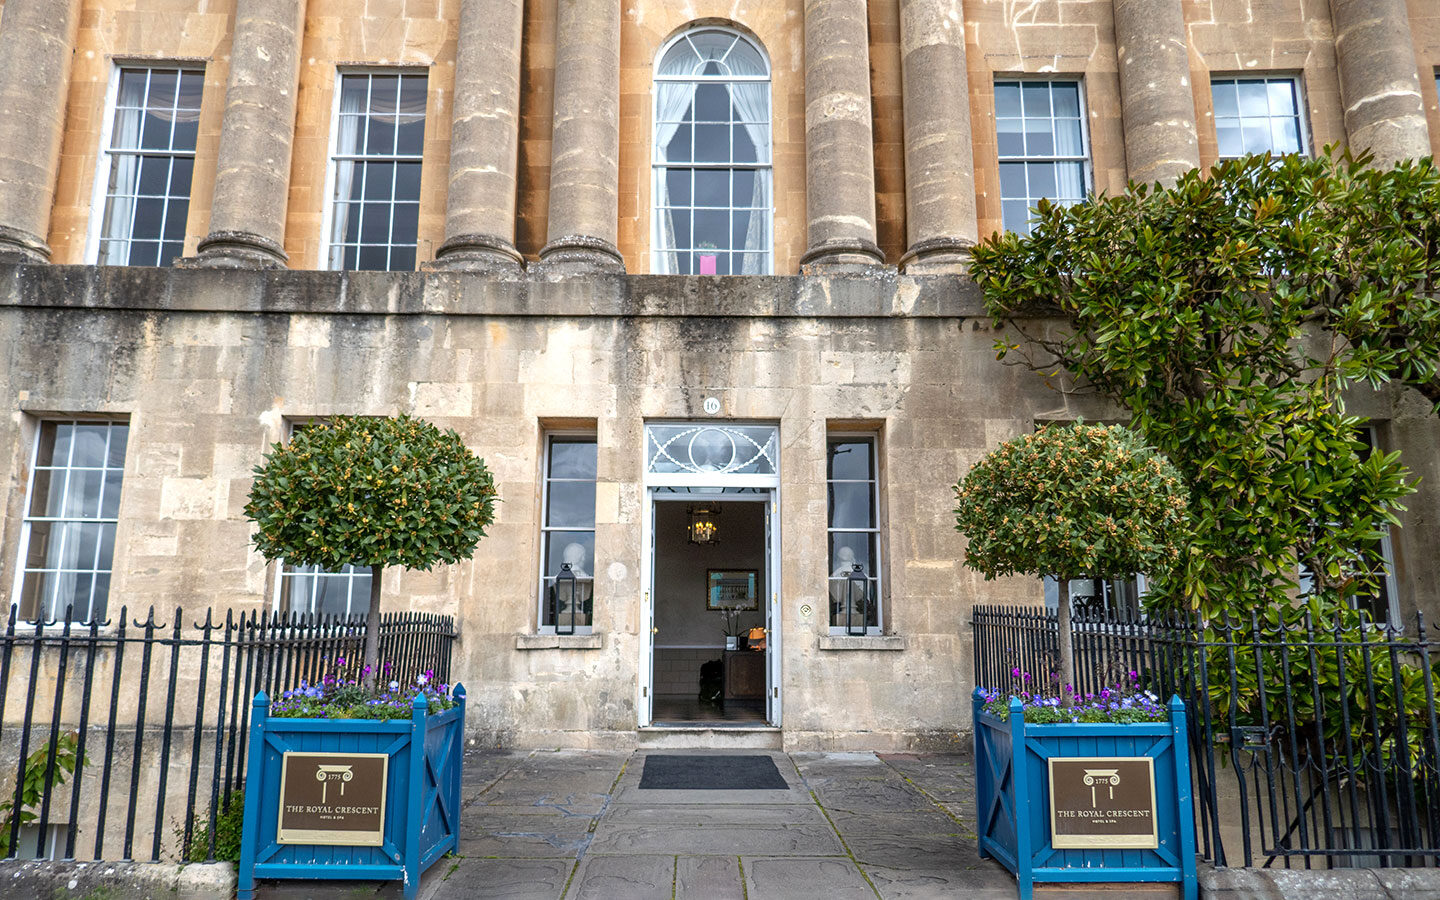 Exterior of The Royal Crescent Hotel in Bath's Royal Crescent